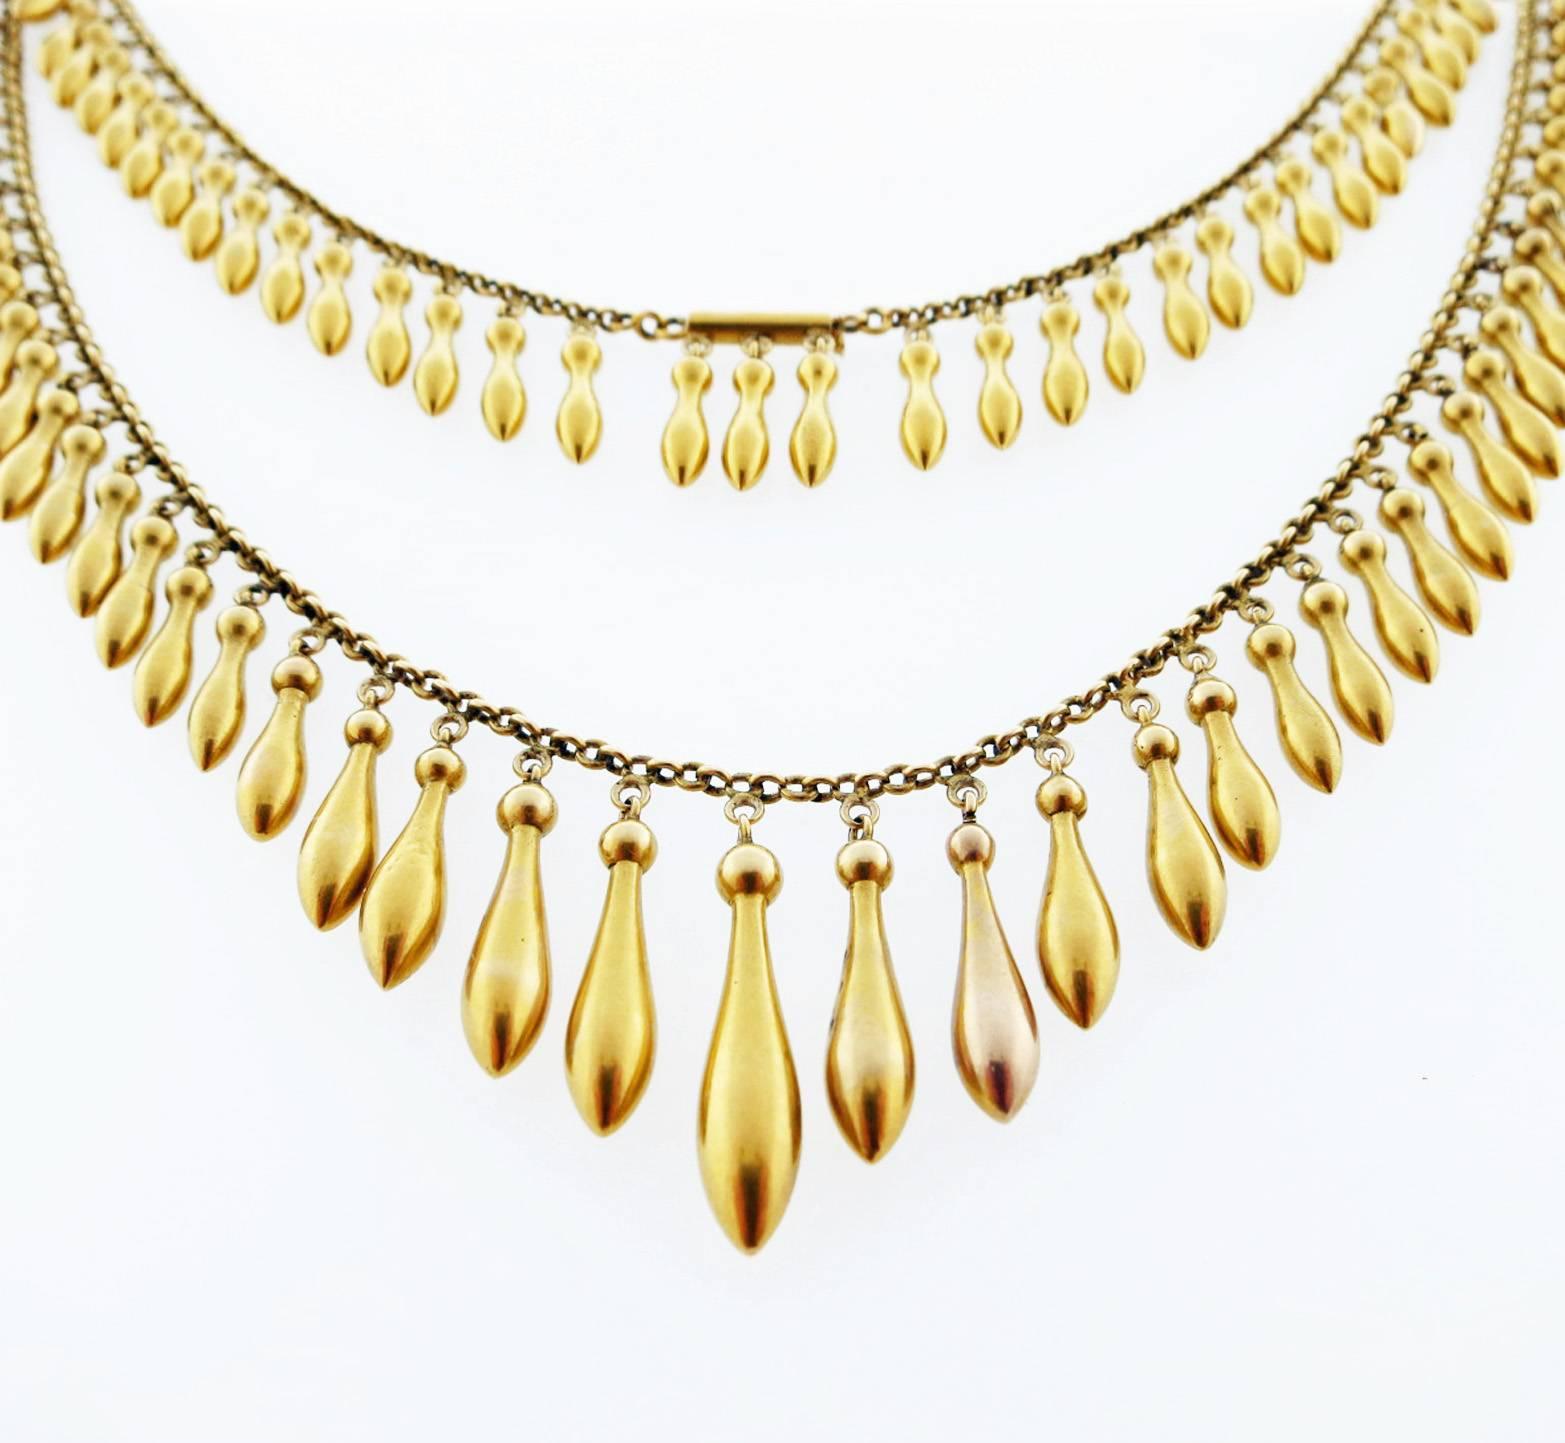  Antique lively and lovely  14kt. necklace measuring measuring 16 1/2 inches in length circa 1880. The necklace graduates gracefully around the neck of the wearer and has a hidden catch at the back.
